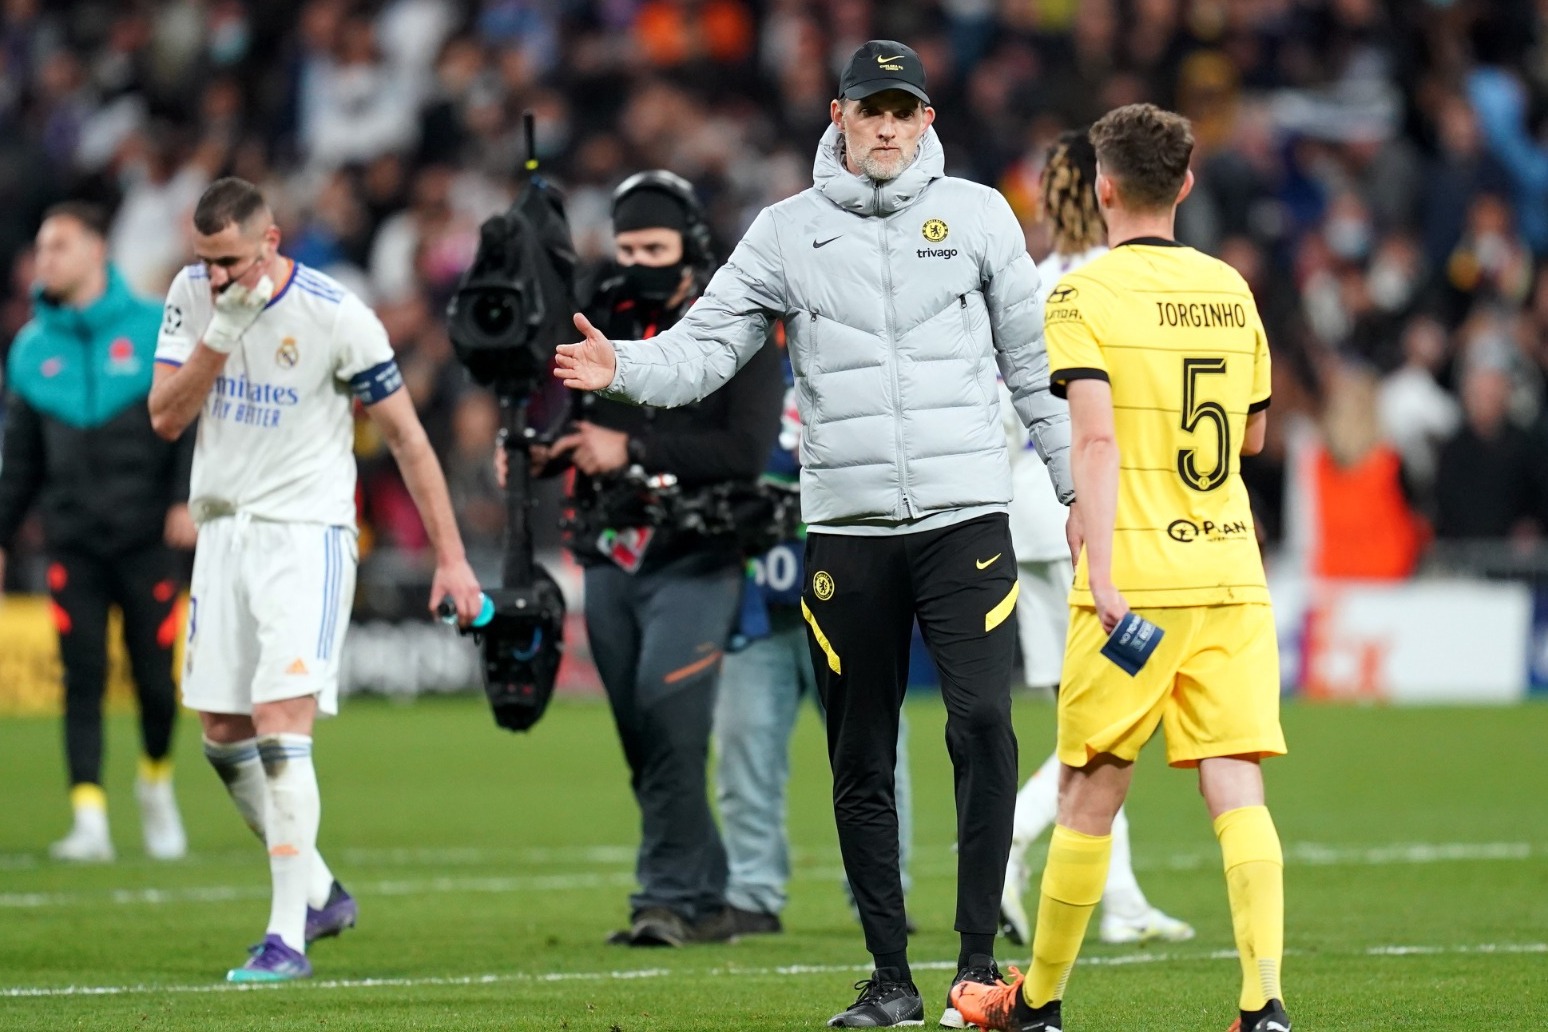 Thomas Tuchel upset with officials as Chelsea exit Champions League 